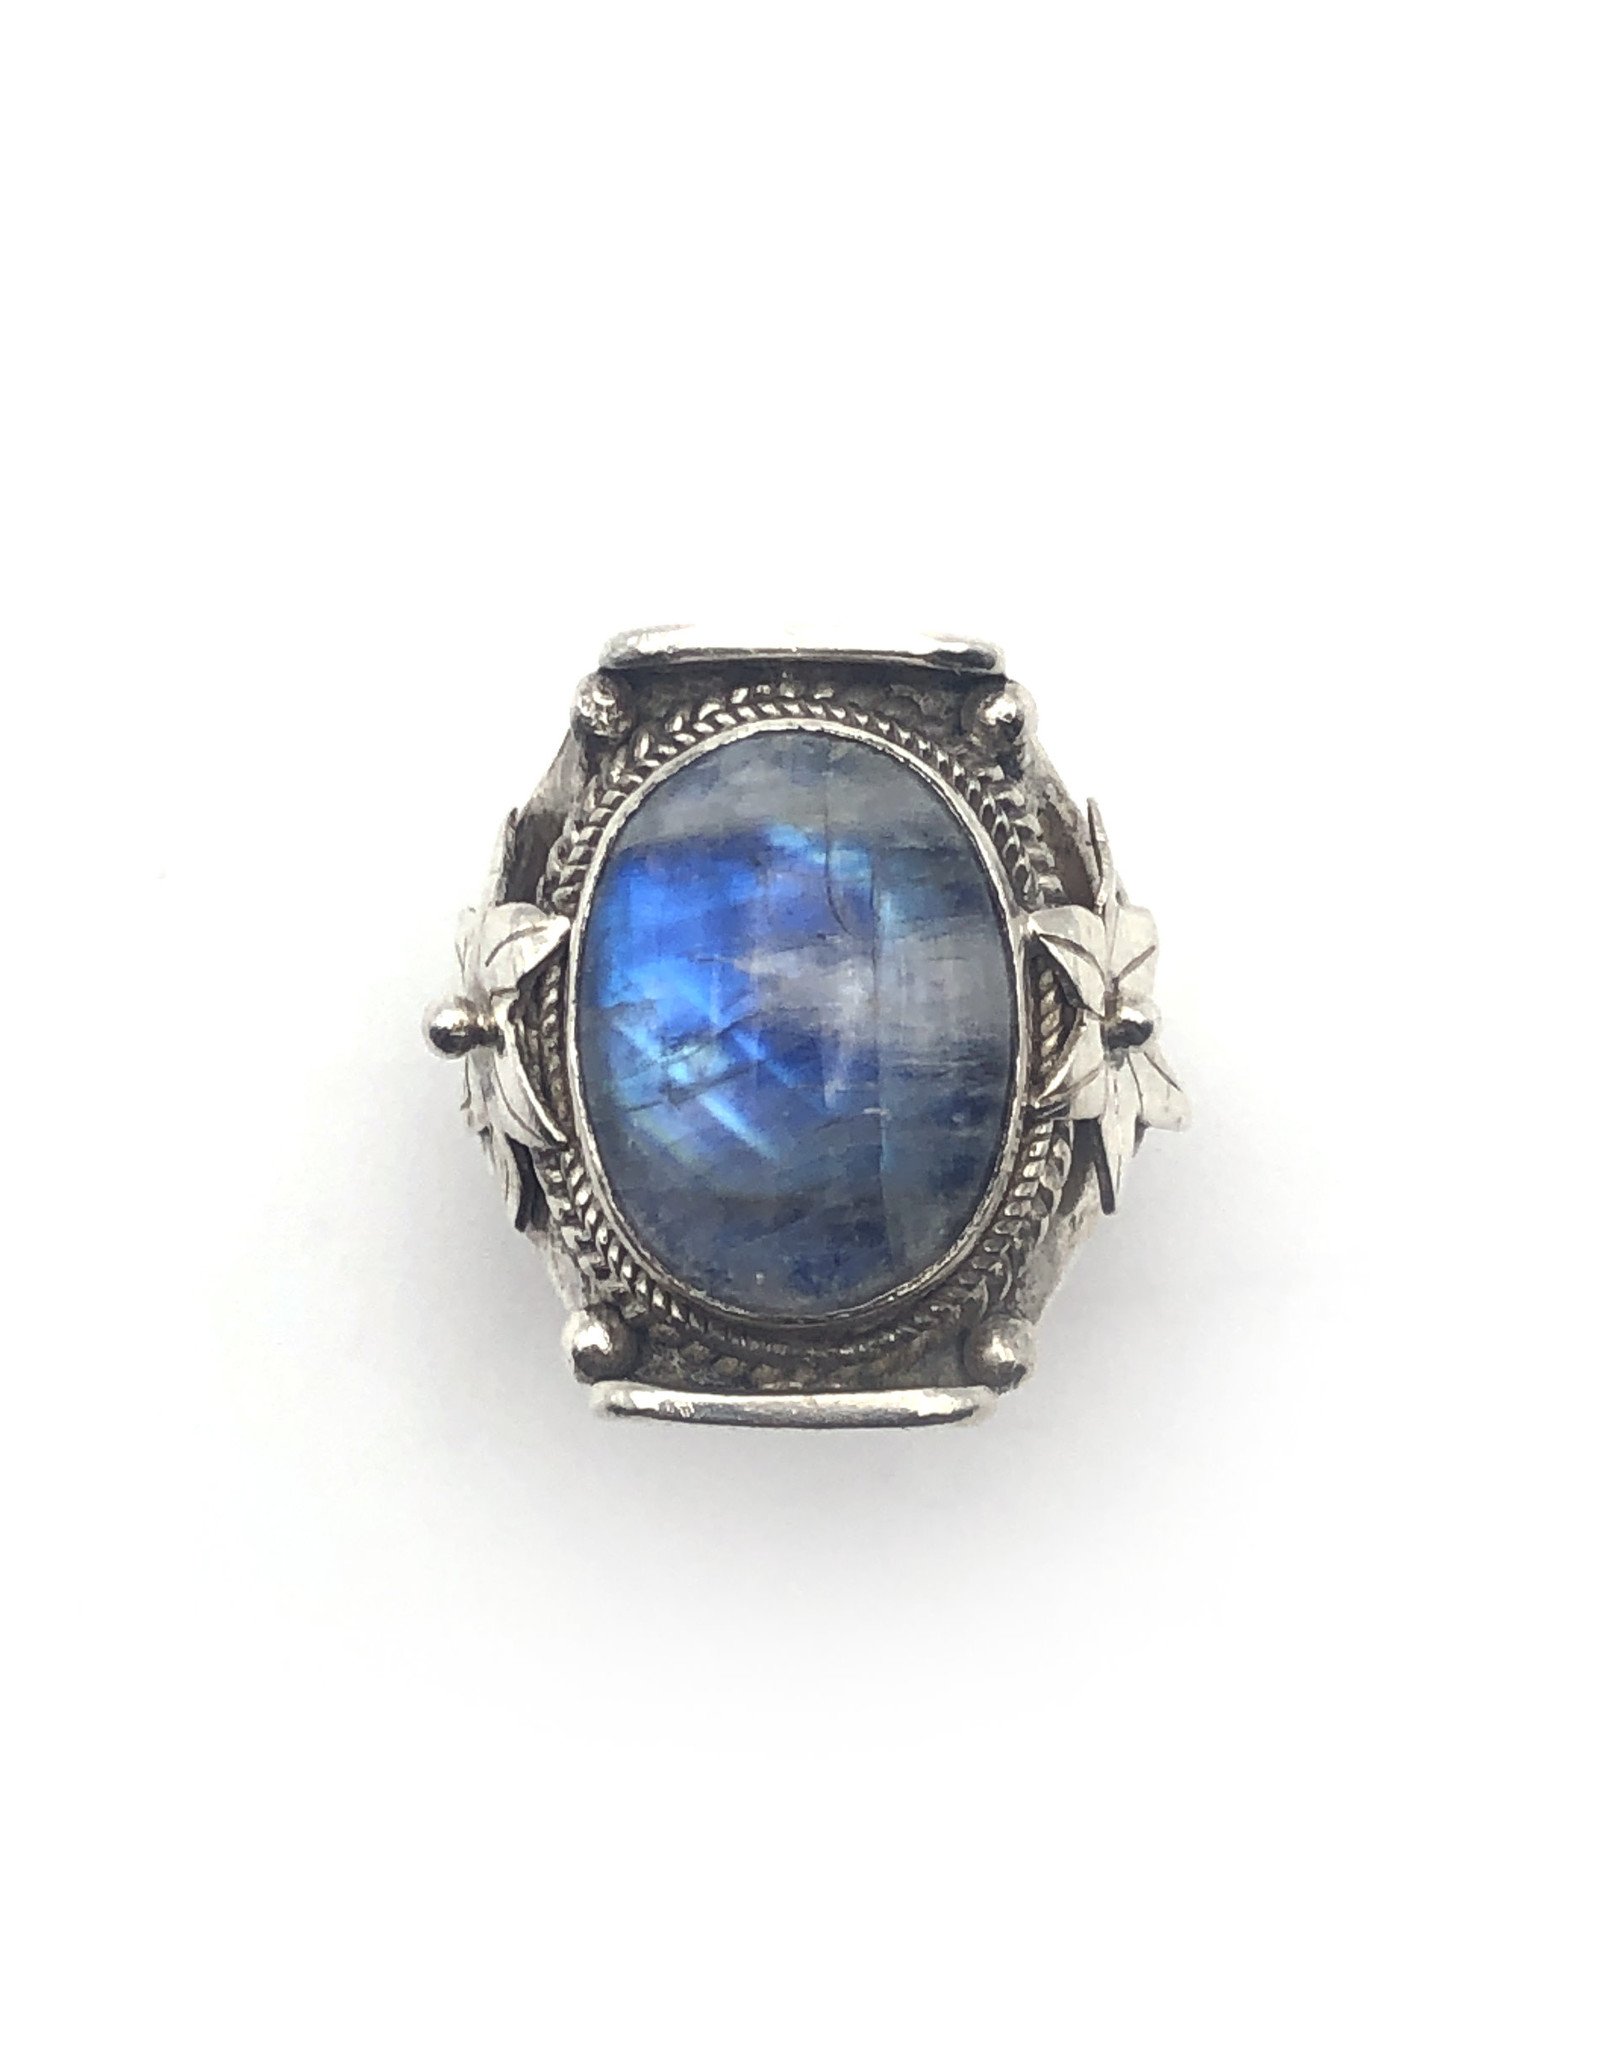 Large Moonstone Cabochon Sterling Ring with Flower and Cord Motif